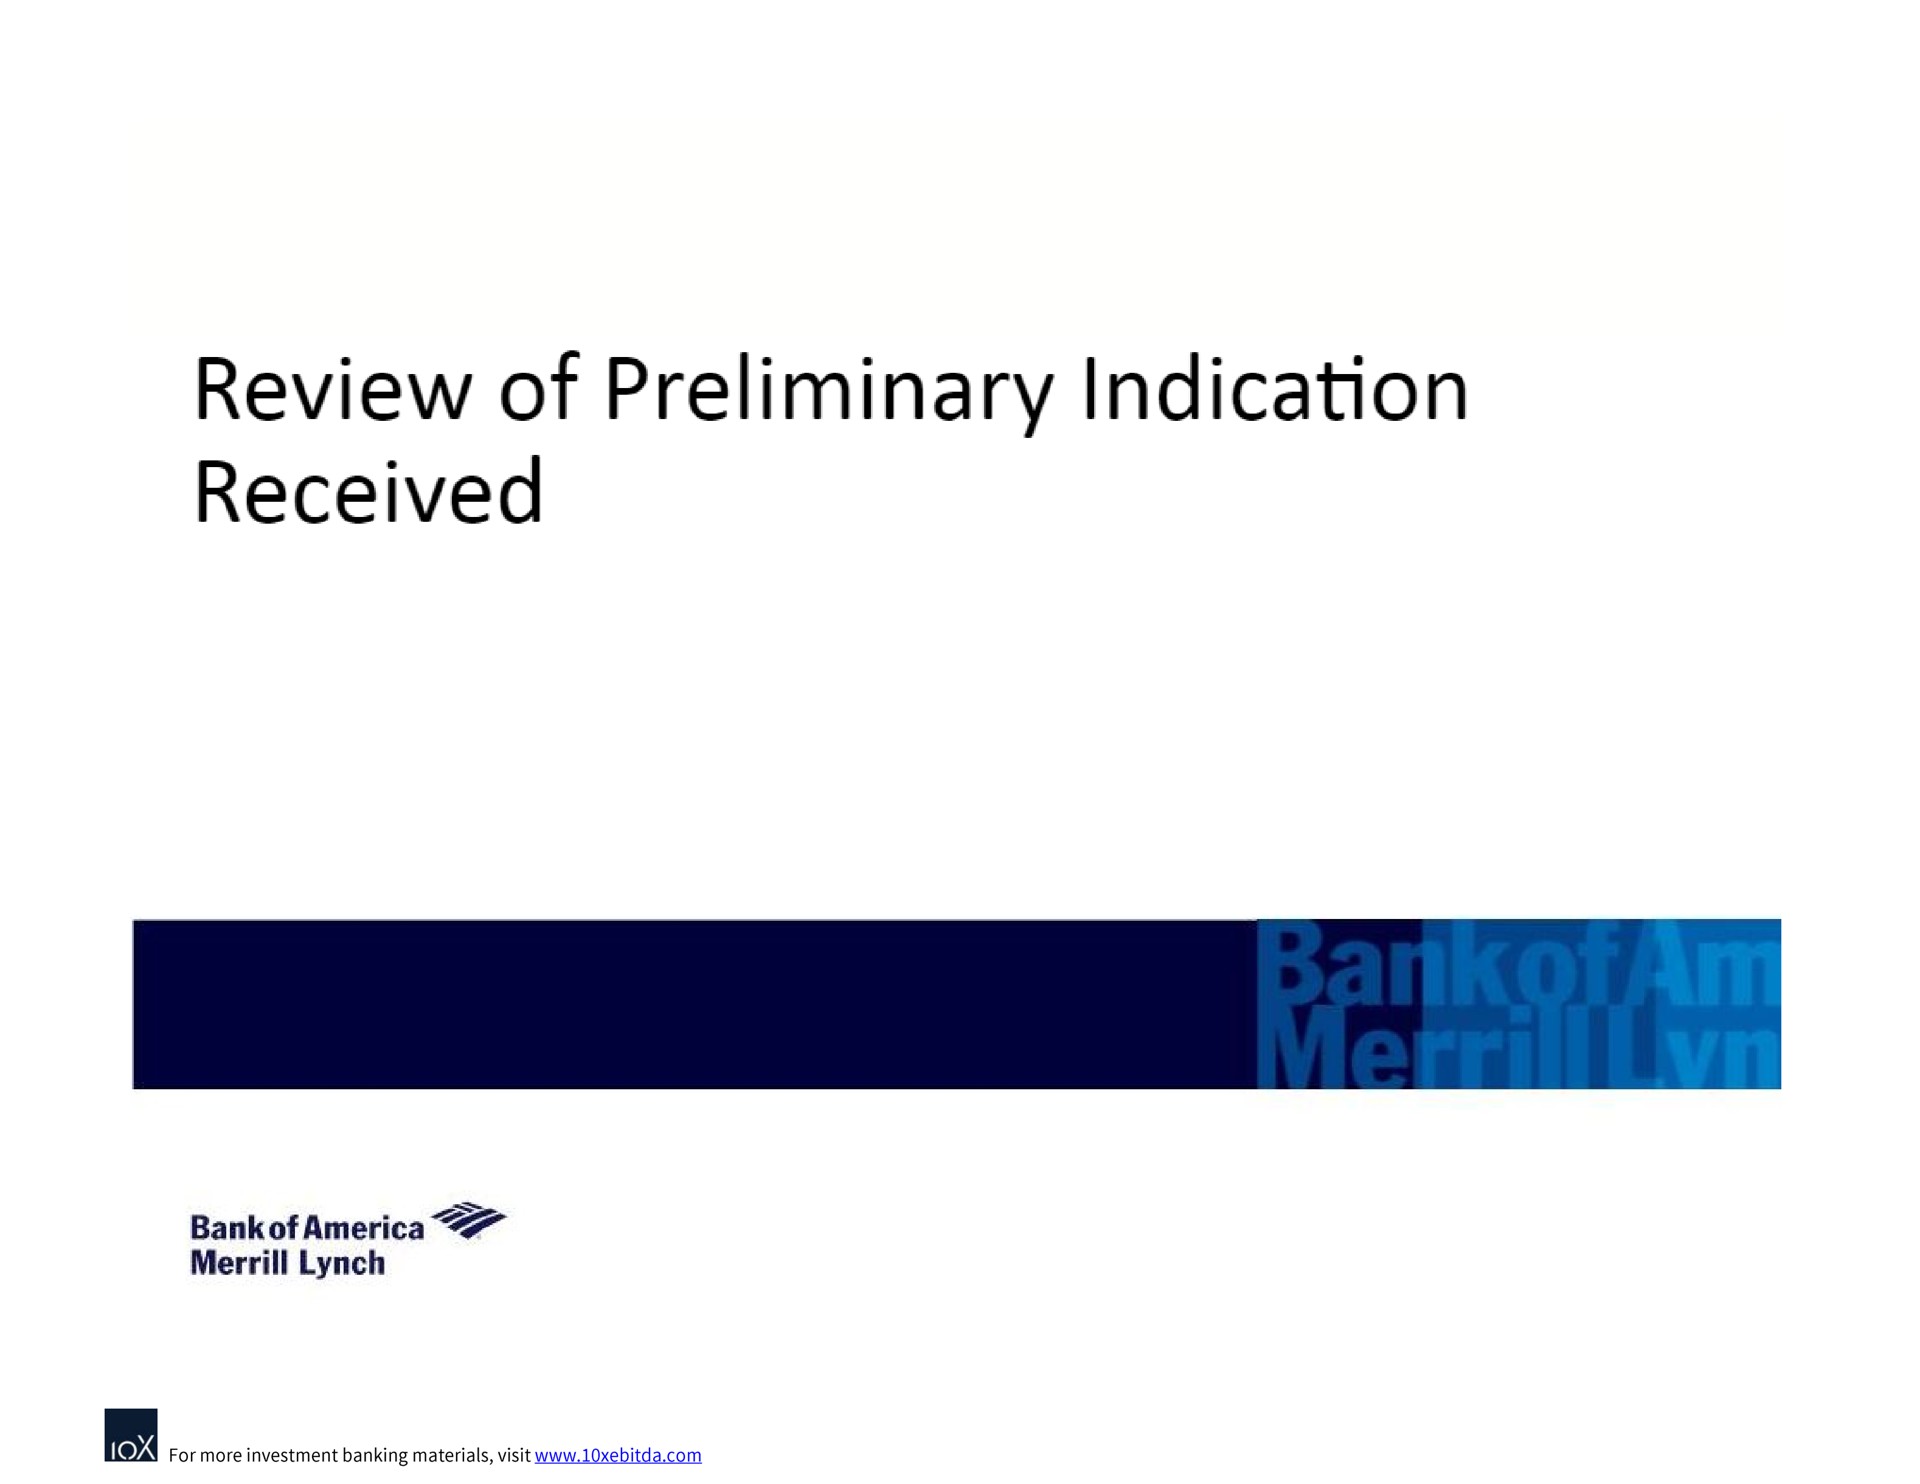 review of preliminary indication received | Bank of America